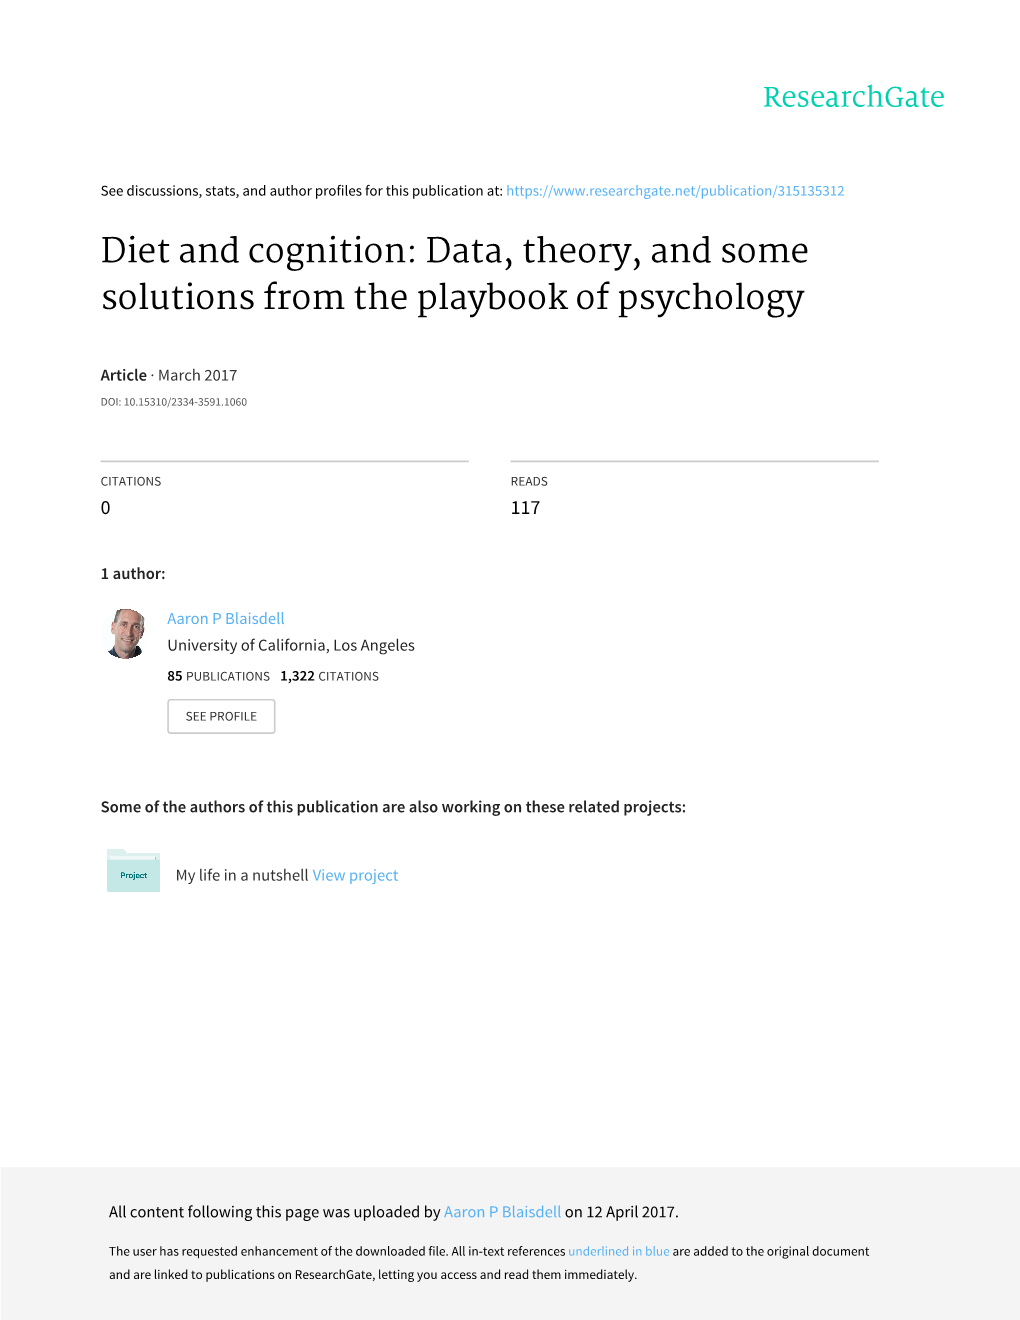 Diet and Cognition: Data, Theory, and Some Solutions from the Playbook of Psychology